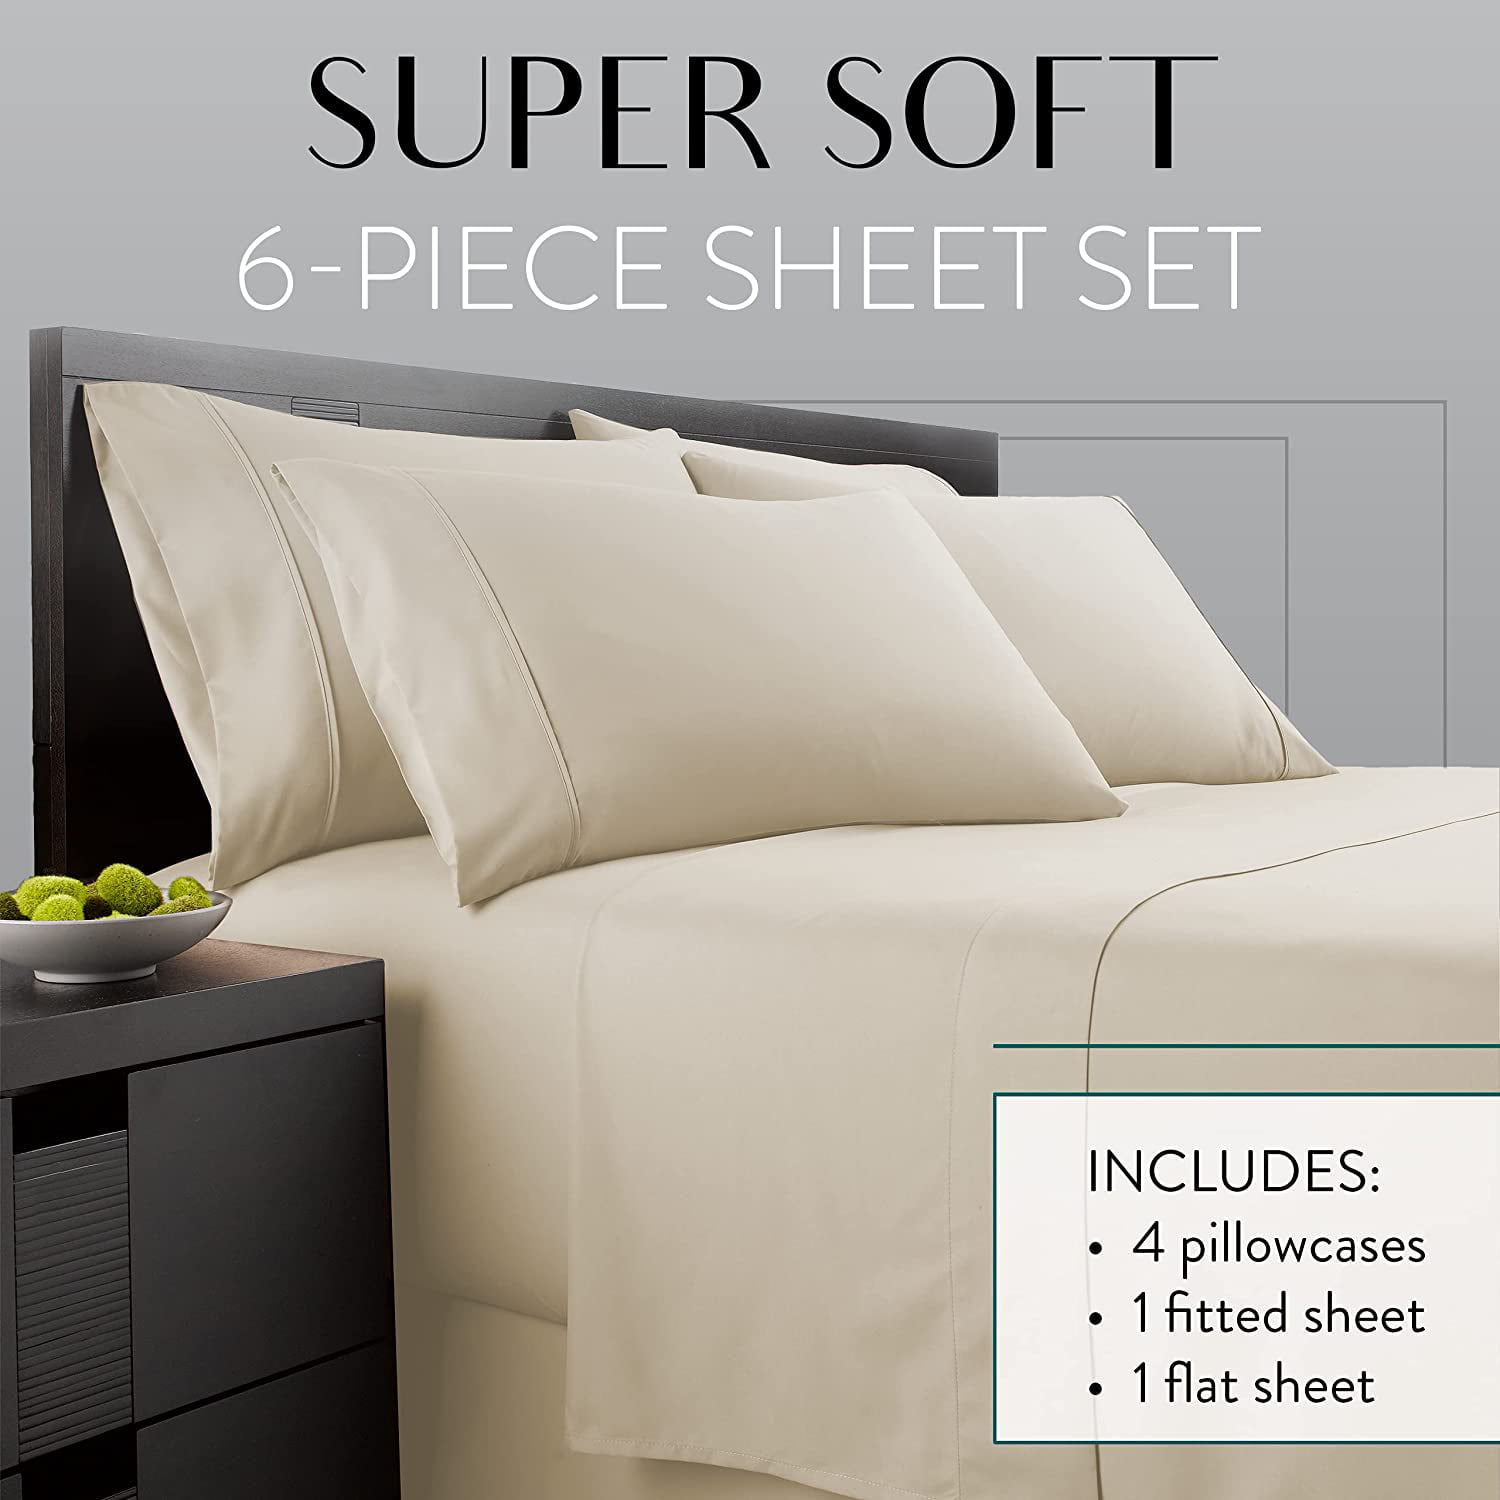  Danjor Linens Queen Sheet Set - 6 Piece Set Including 4  Pillowcases - Deep Pockets - Breathable, Soft Bed Sheets - Wrinkle Free -  Machine Washable - Black Sheets for Queen Size Bed - 6 pc : Home & Kitchen